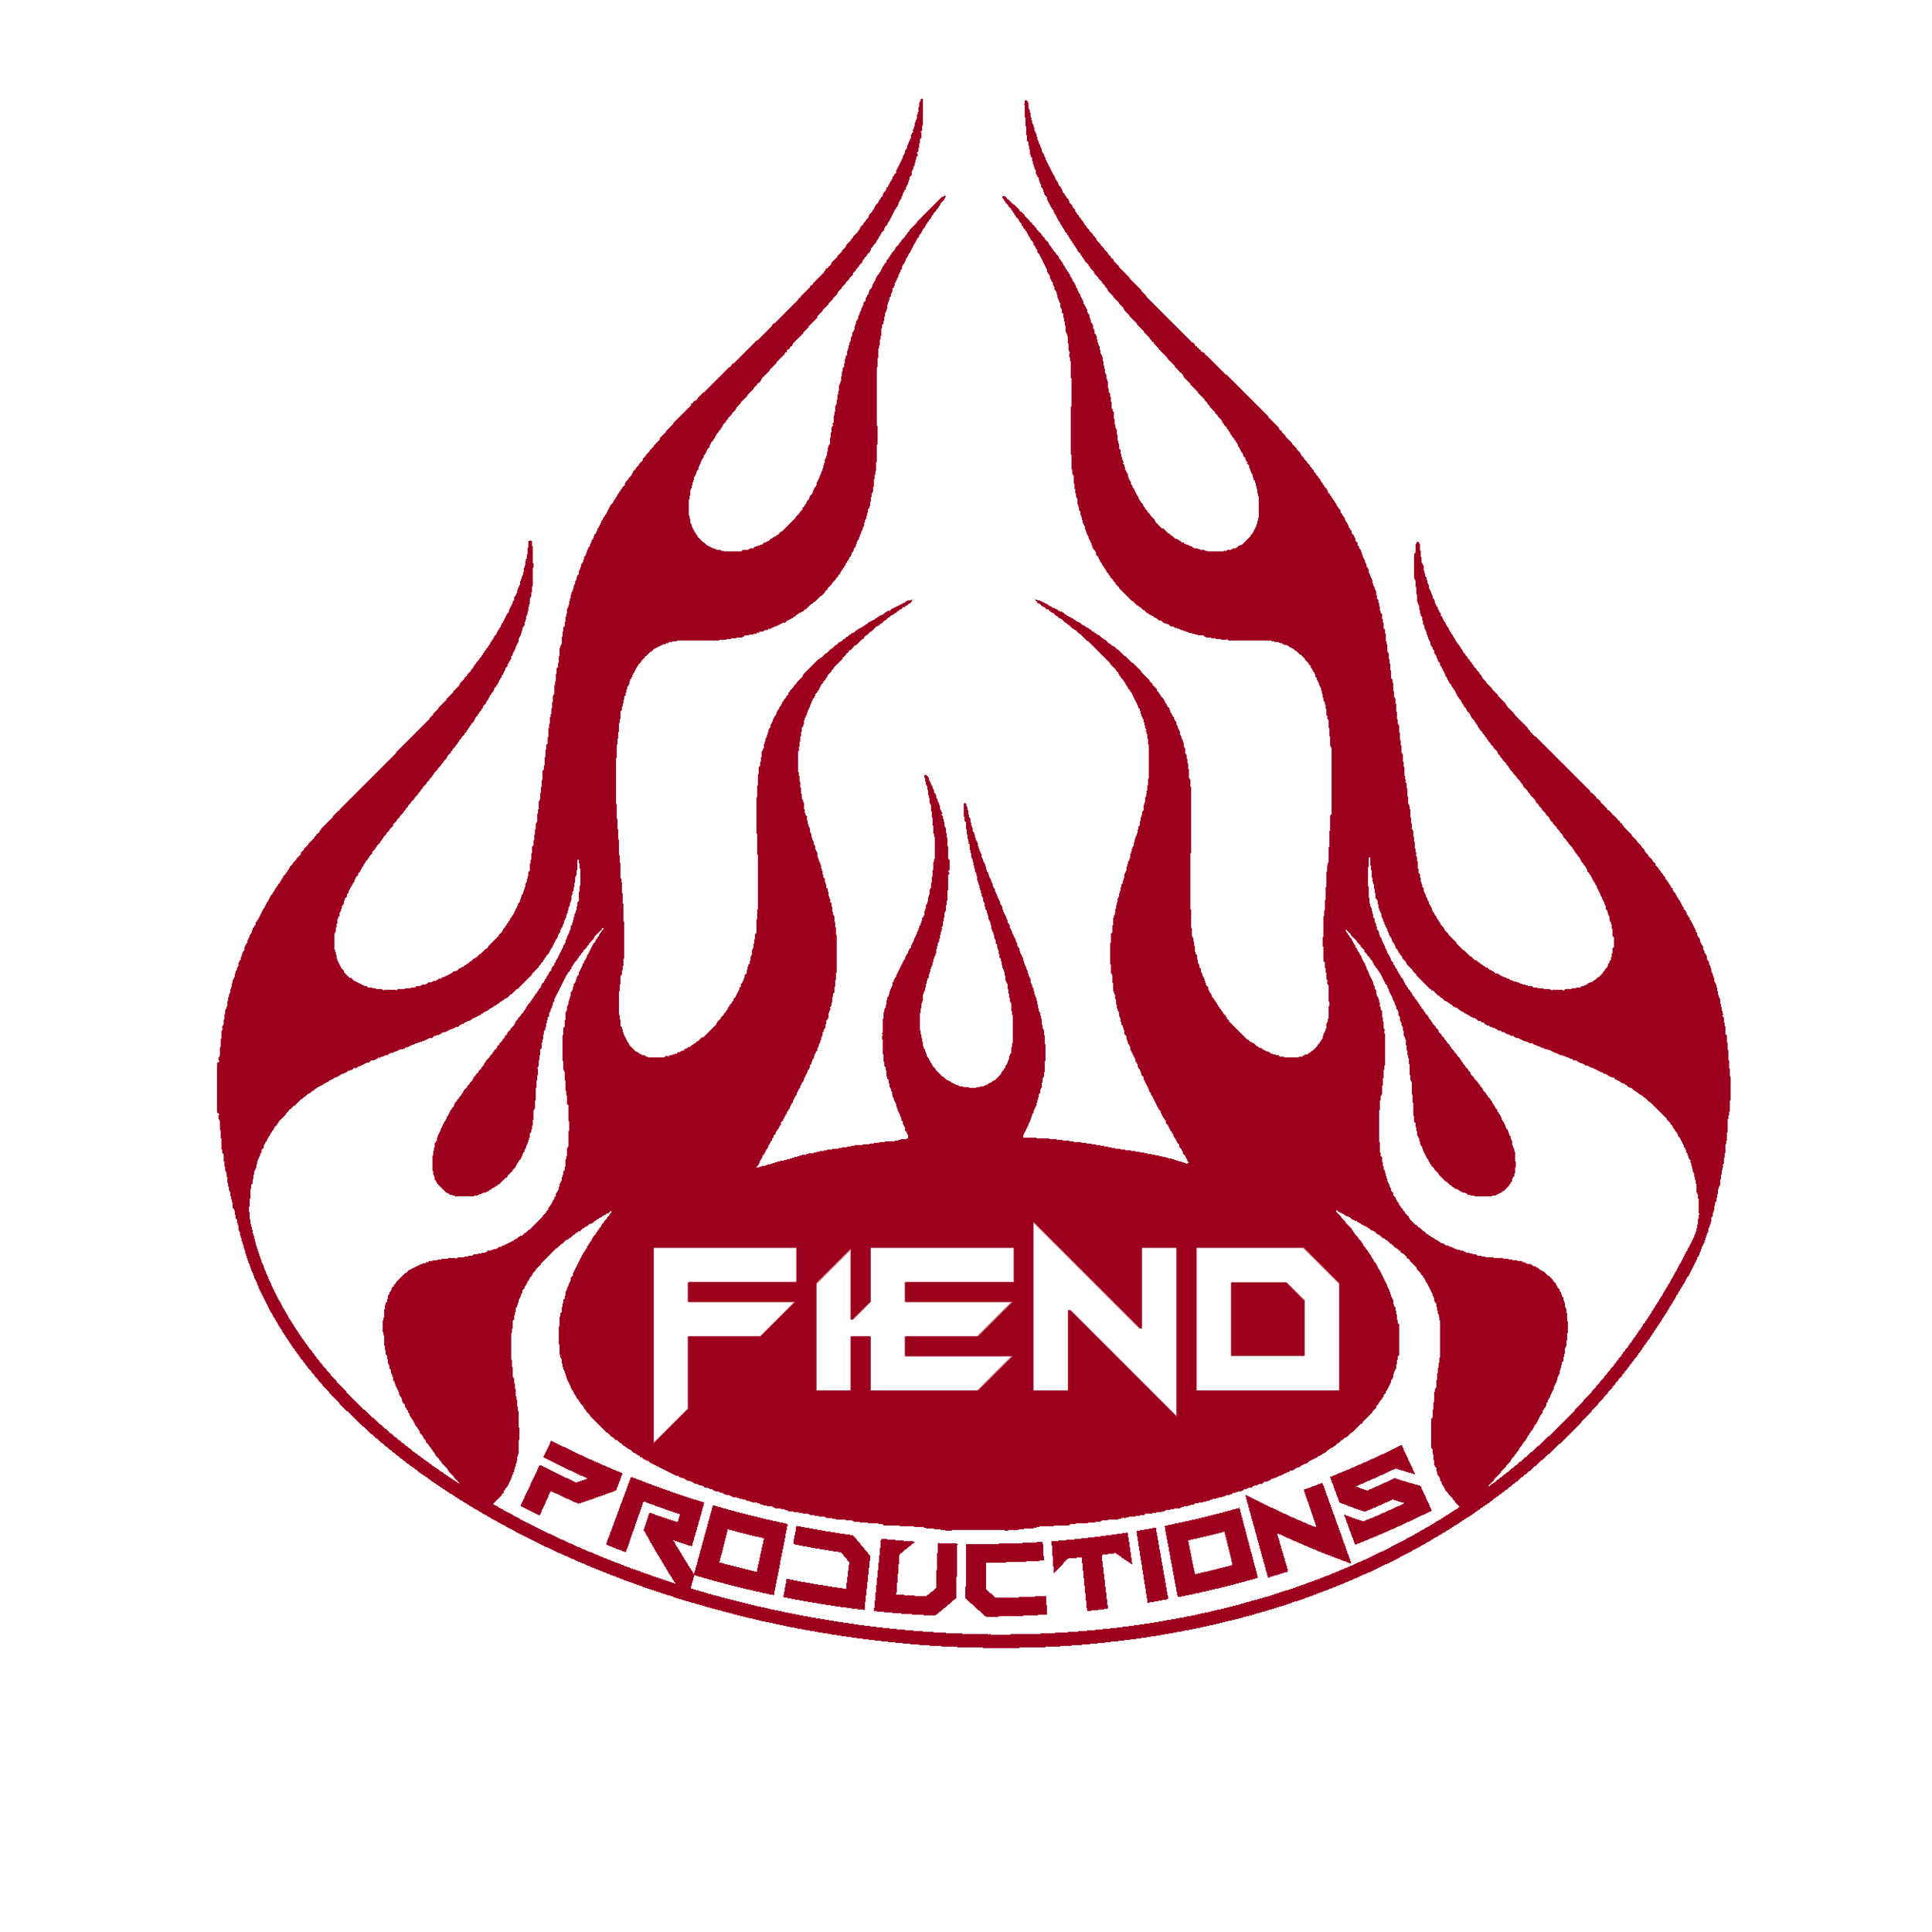 Fiend Productions Limited